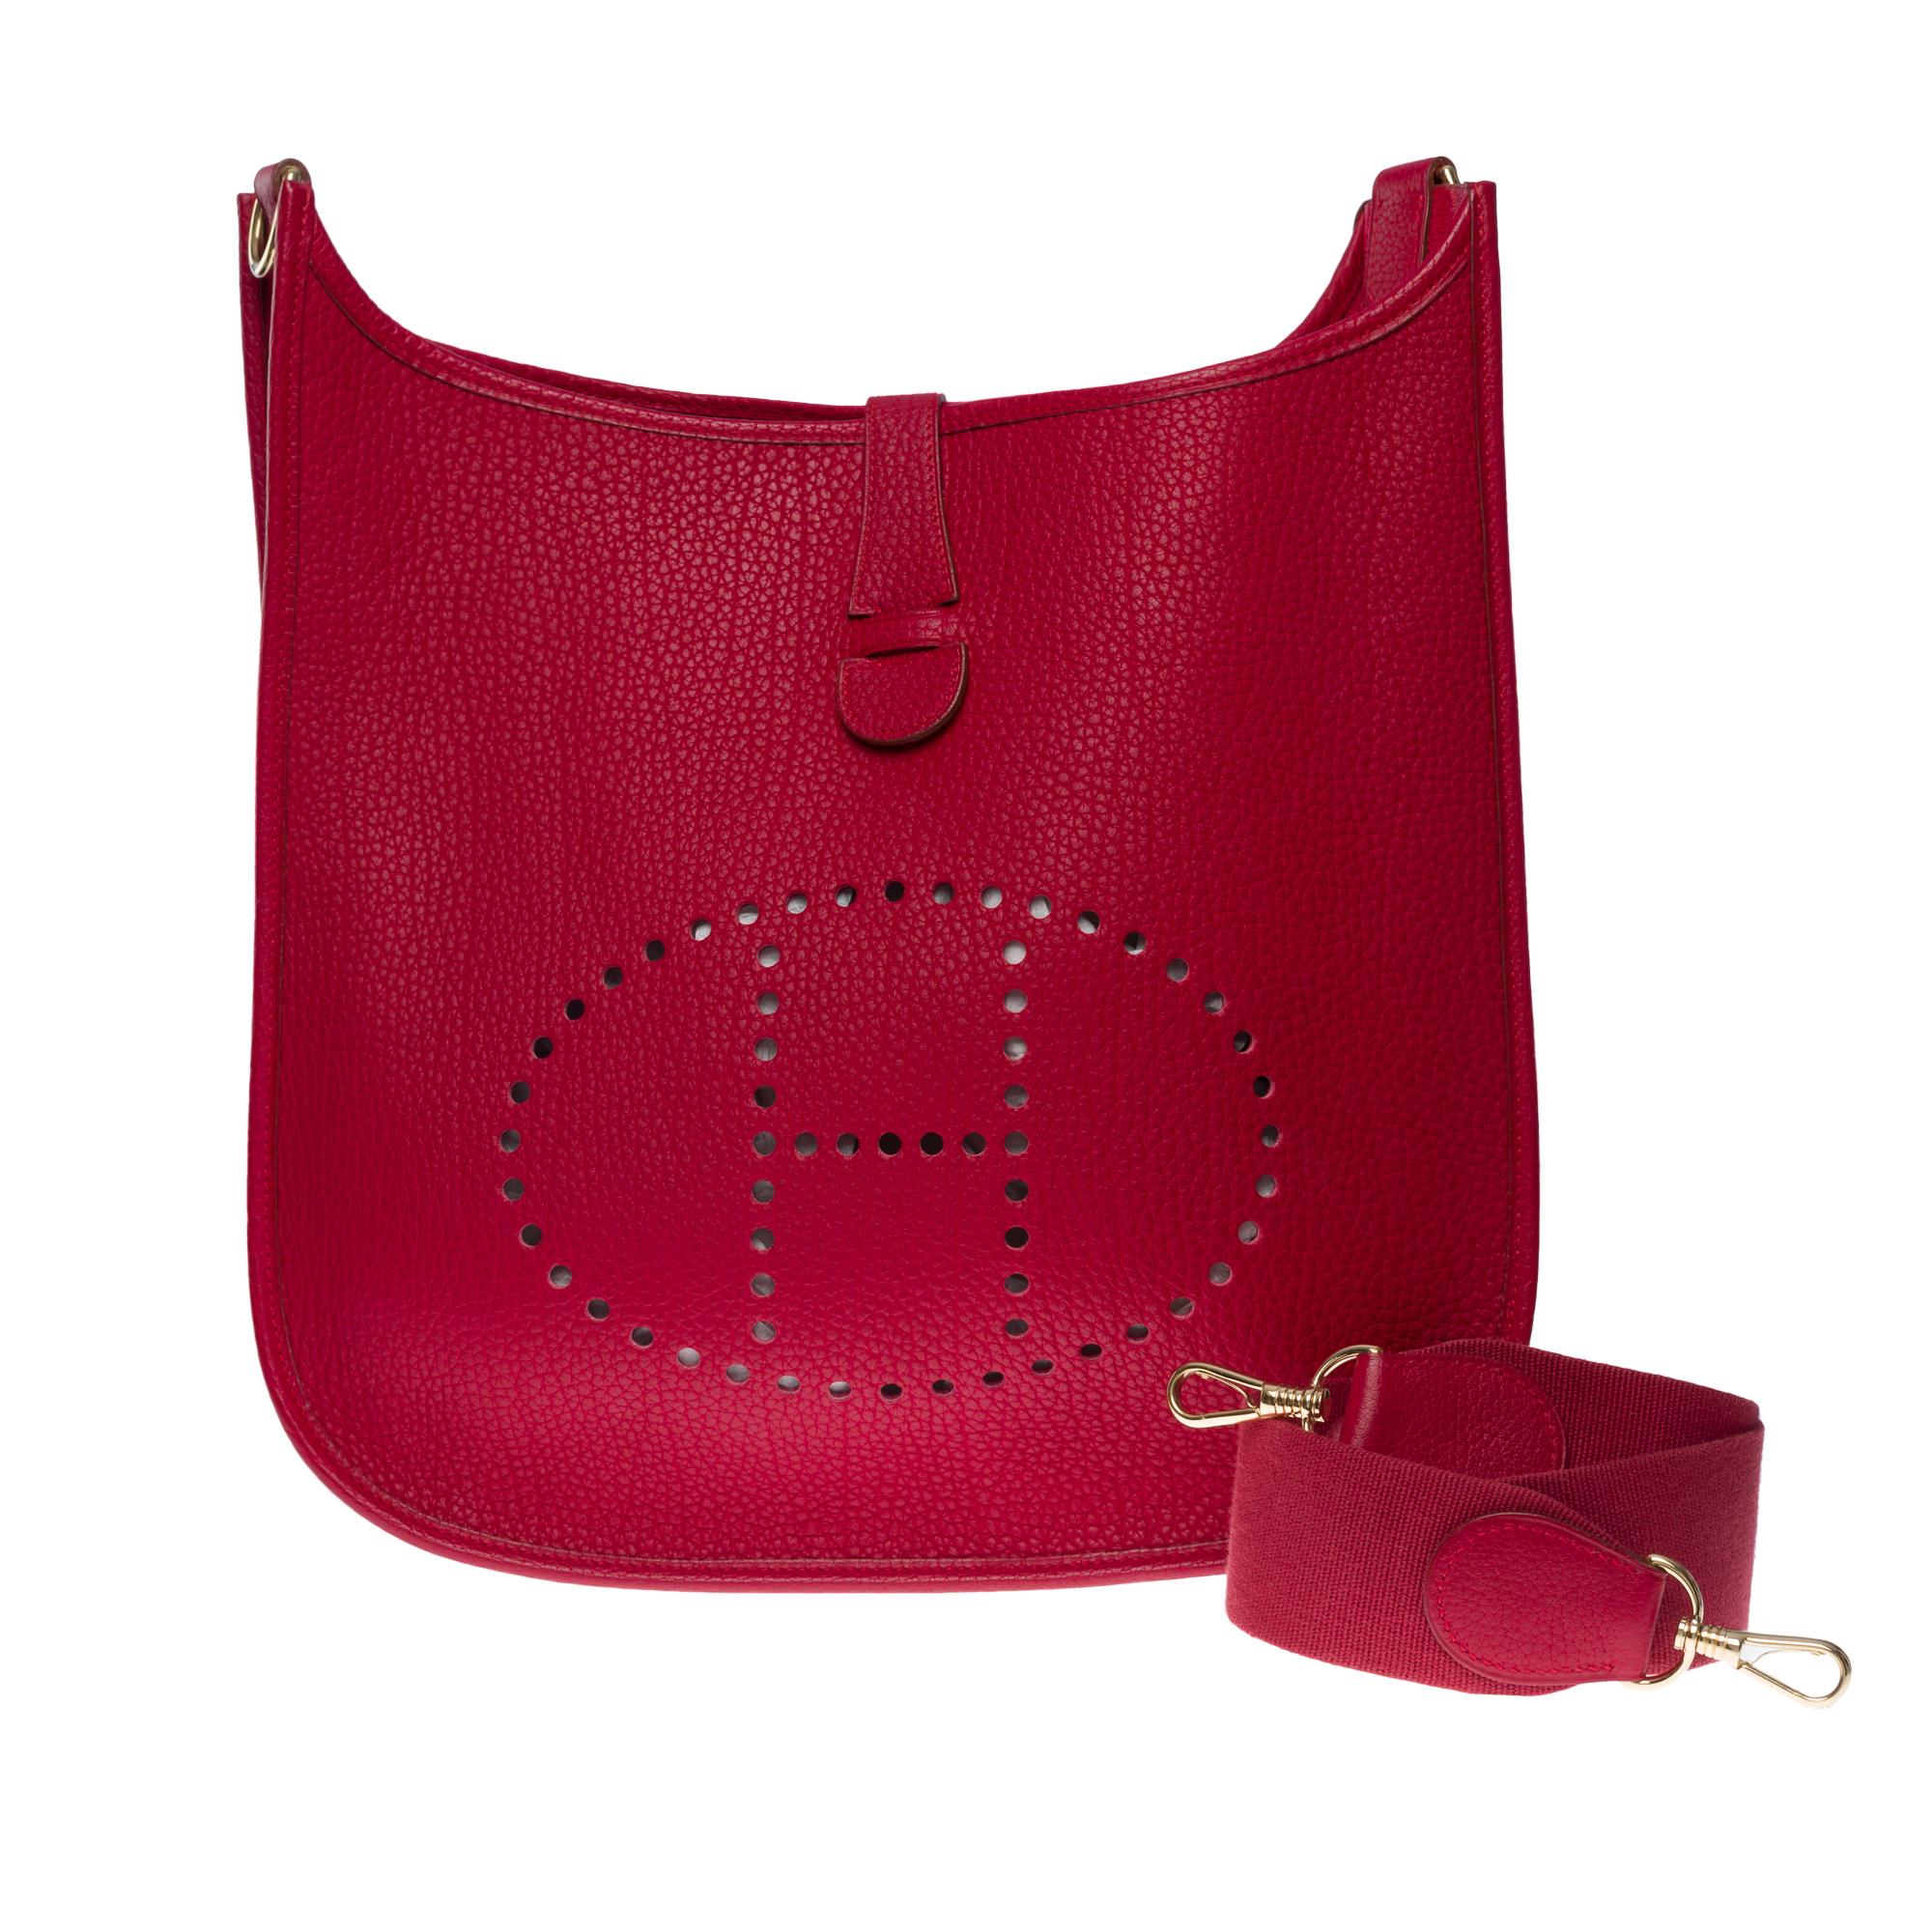 The Iconic Hermes Evelyne 33 (Grand Modèle) shoulder bag in Red Casaque Togo leather, gold metal hardware, a removable shoulder strap in red canvas for a shoulder or crossbody carry

Snap closure on flap
Red suede interior
Signature: 